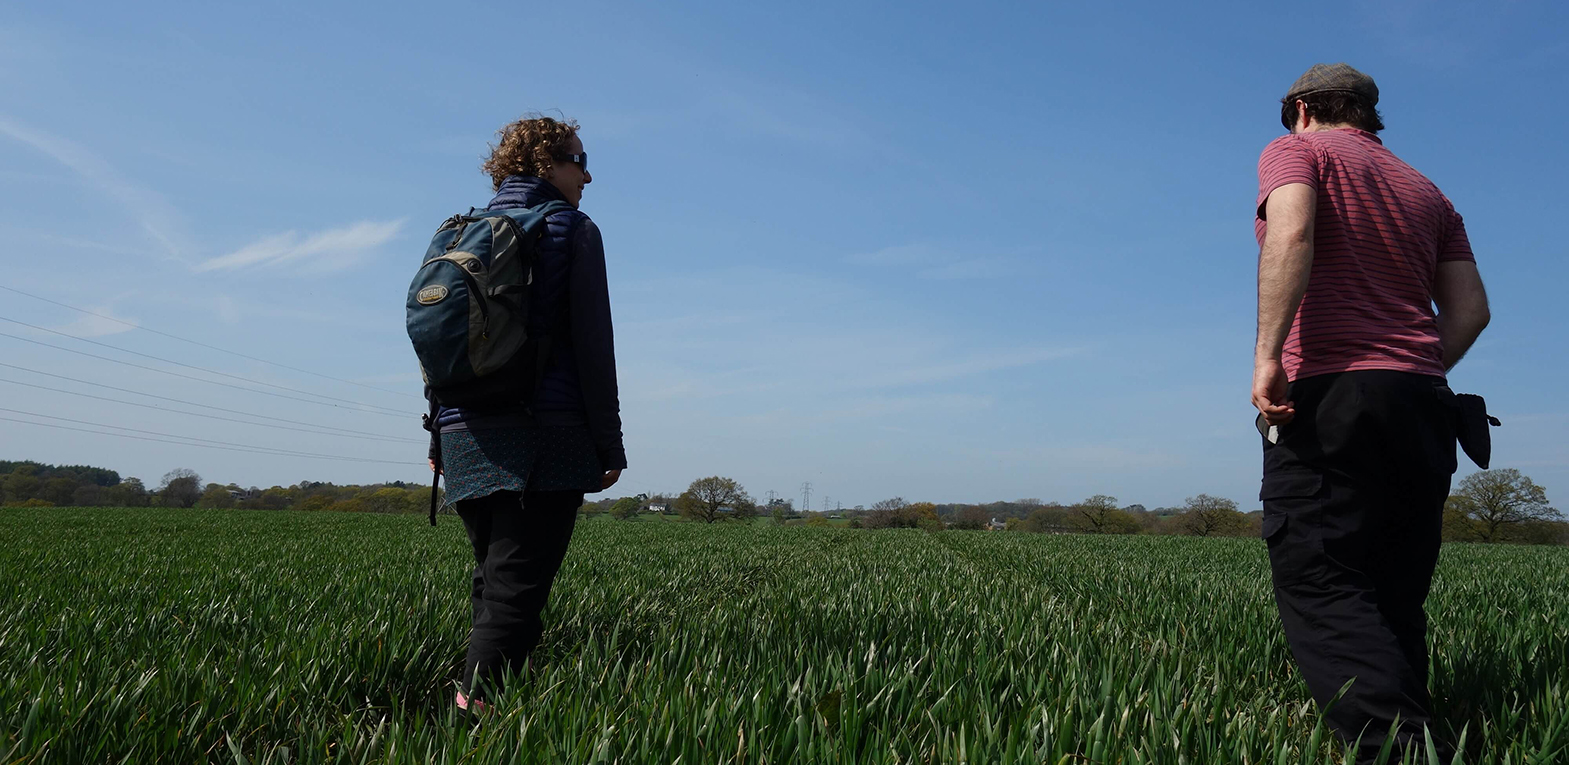 A photograph from the boundary walk. The artists face away from the camera surveying a planted field.